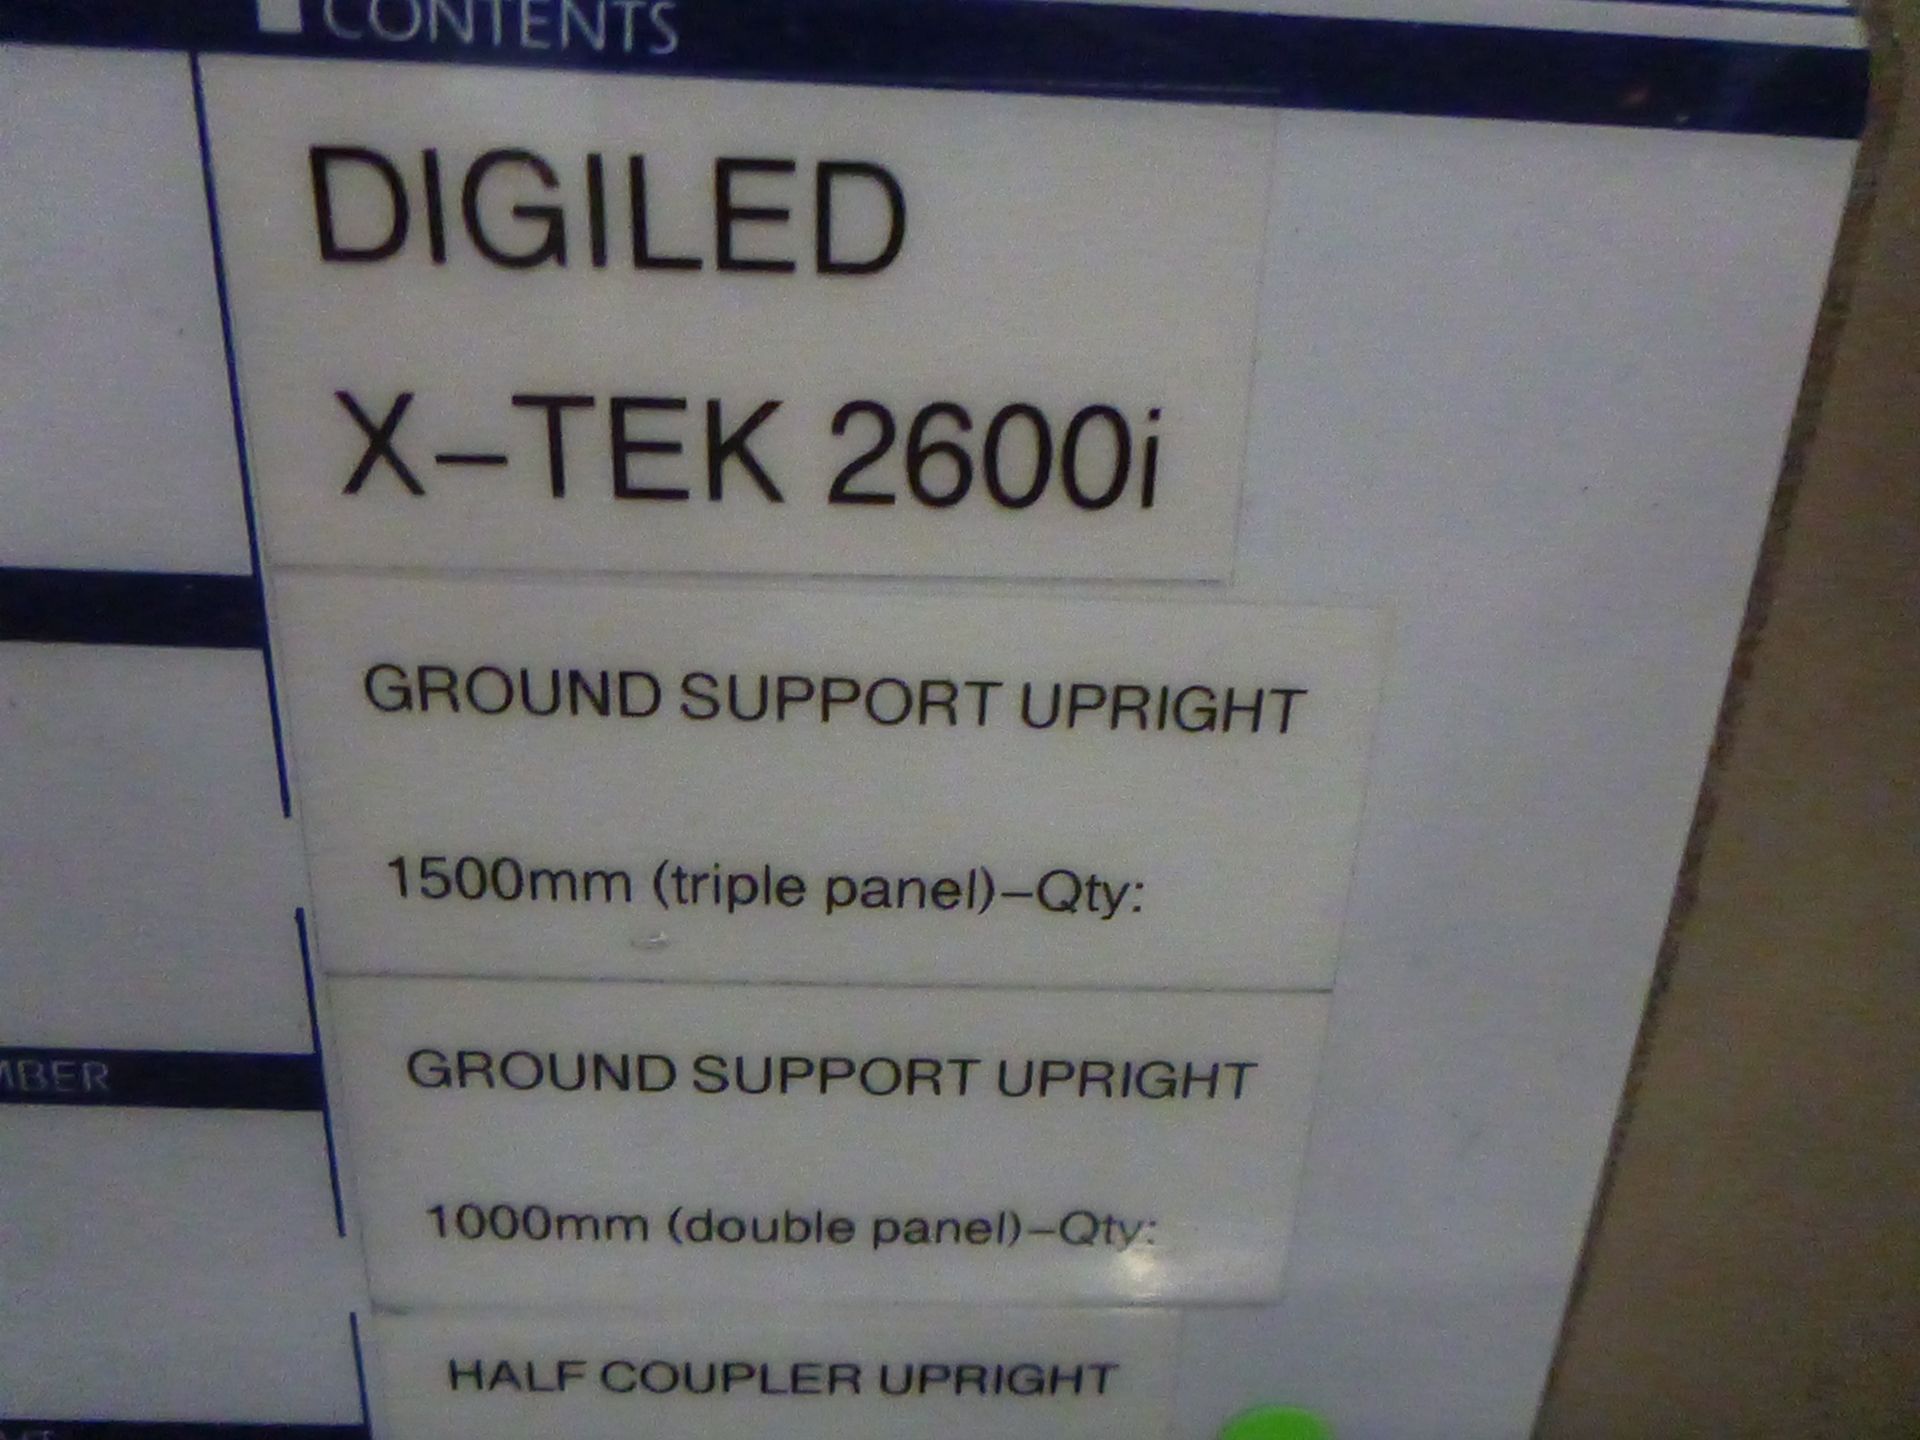 DigiLED X-Tek 2600i Ground Support Uprights 1500 mm triple panel, Qty 7, 1000 mm double panels Qty 3 - Image 5 of 6